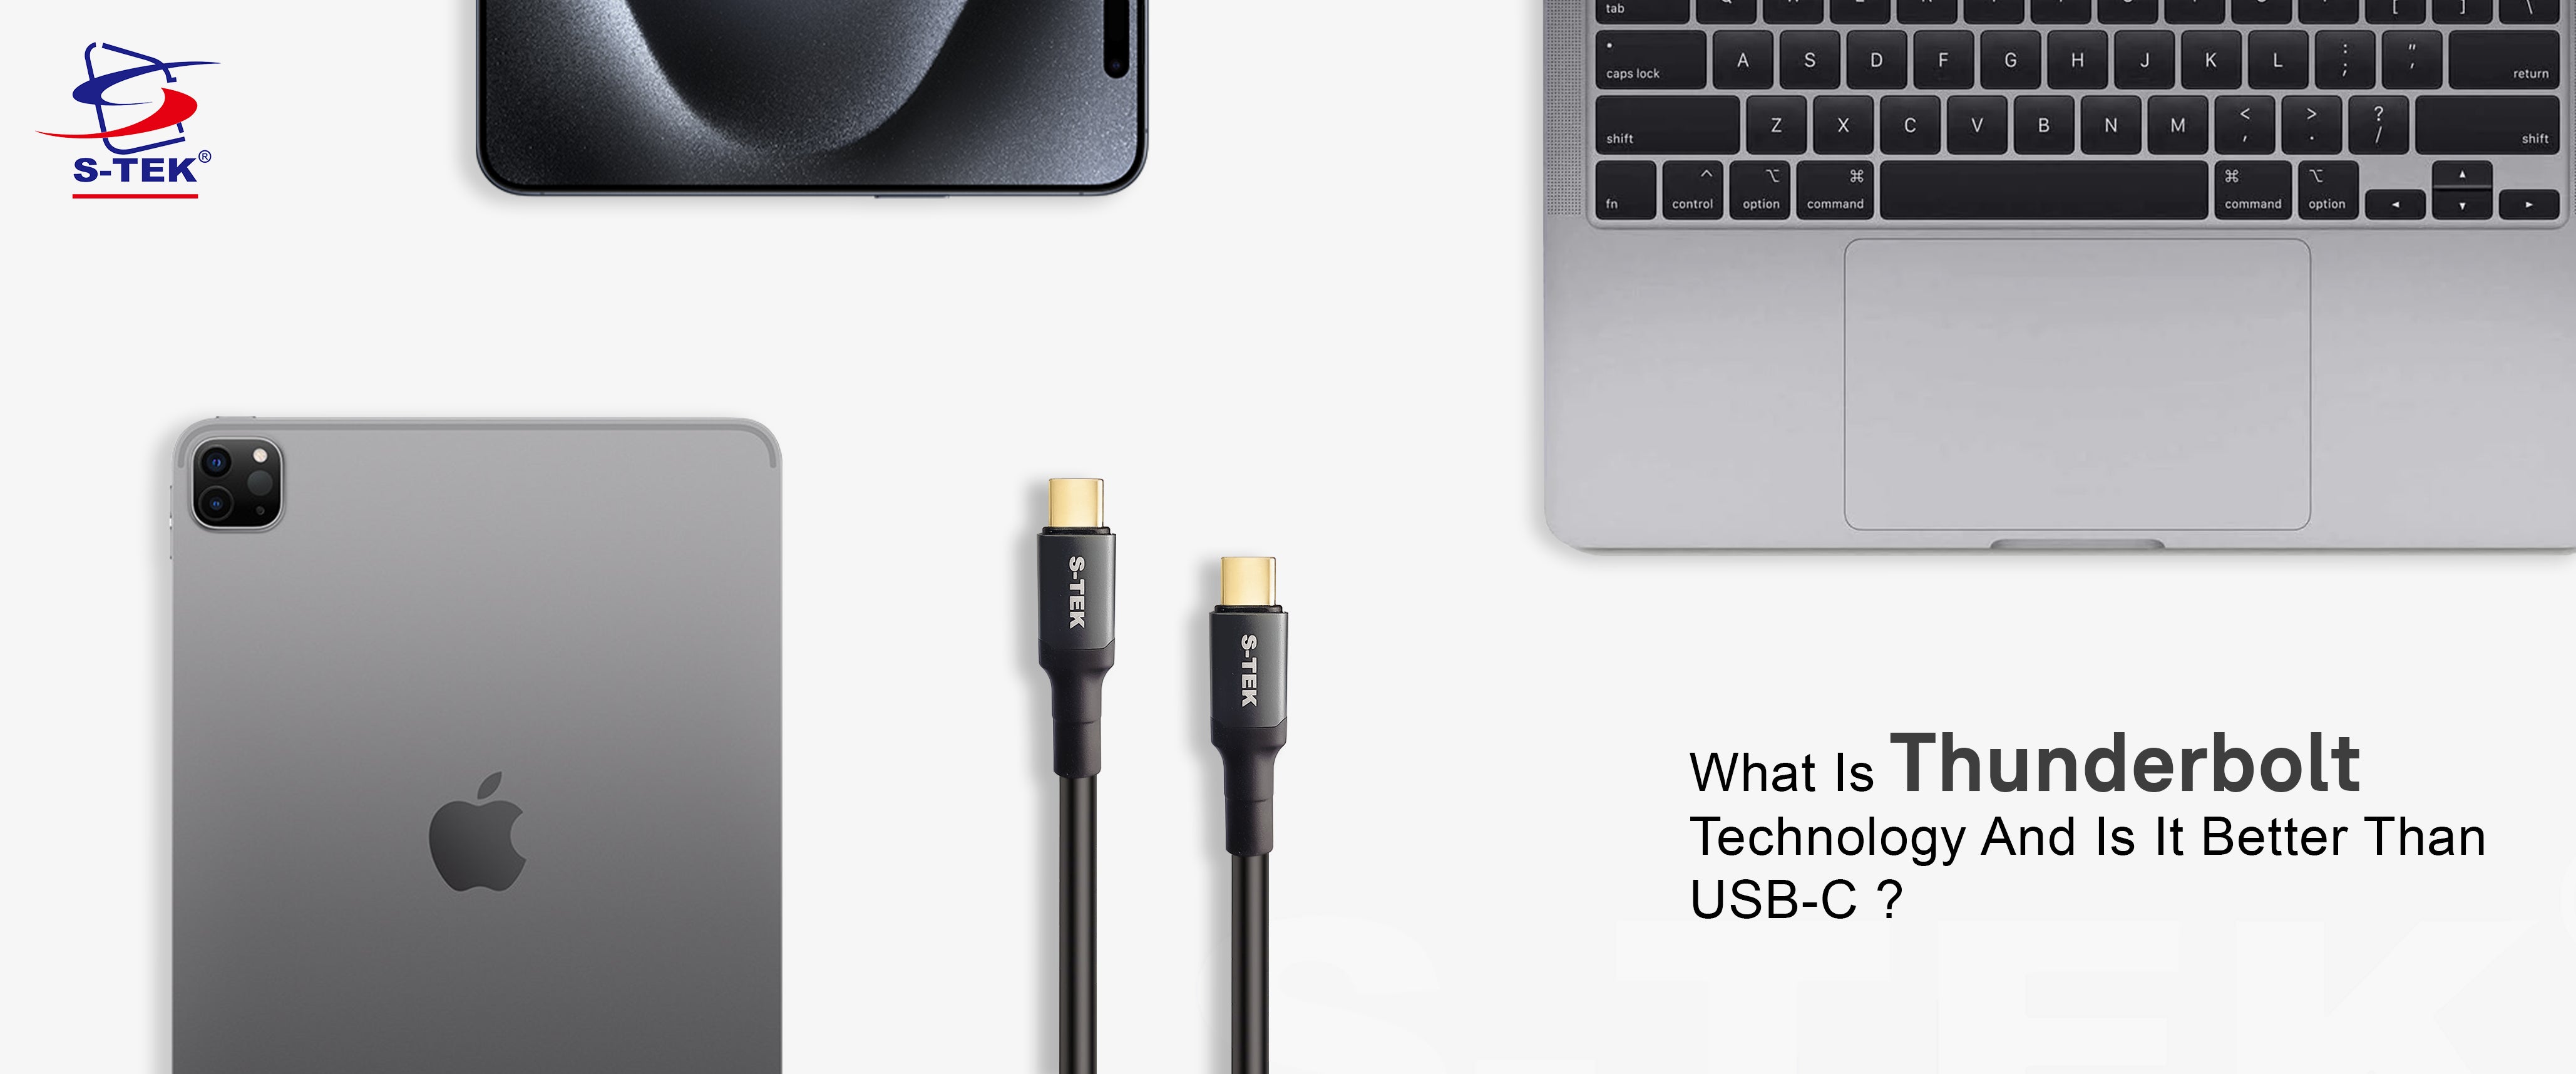 What is Thunderbolt Technology and Is it Better than USB-C?